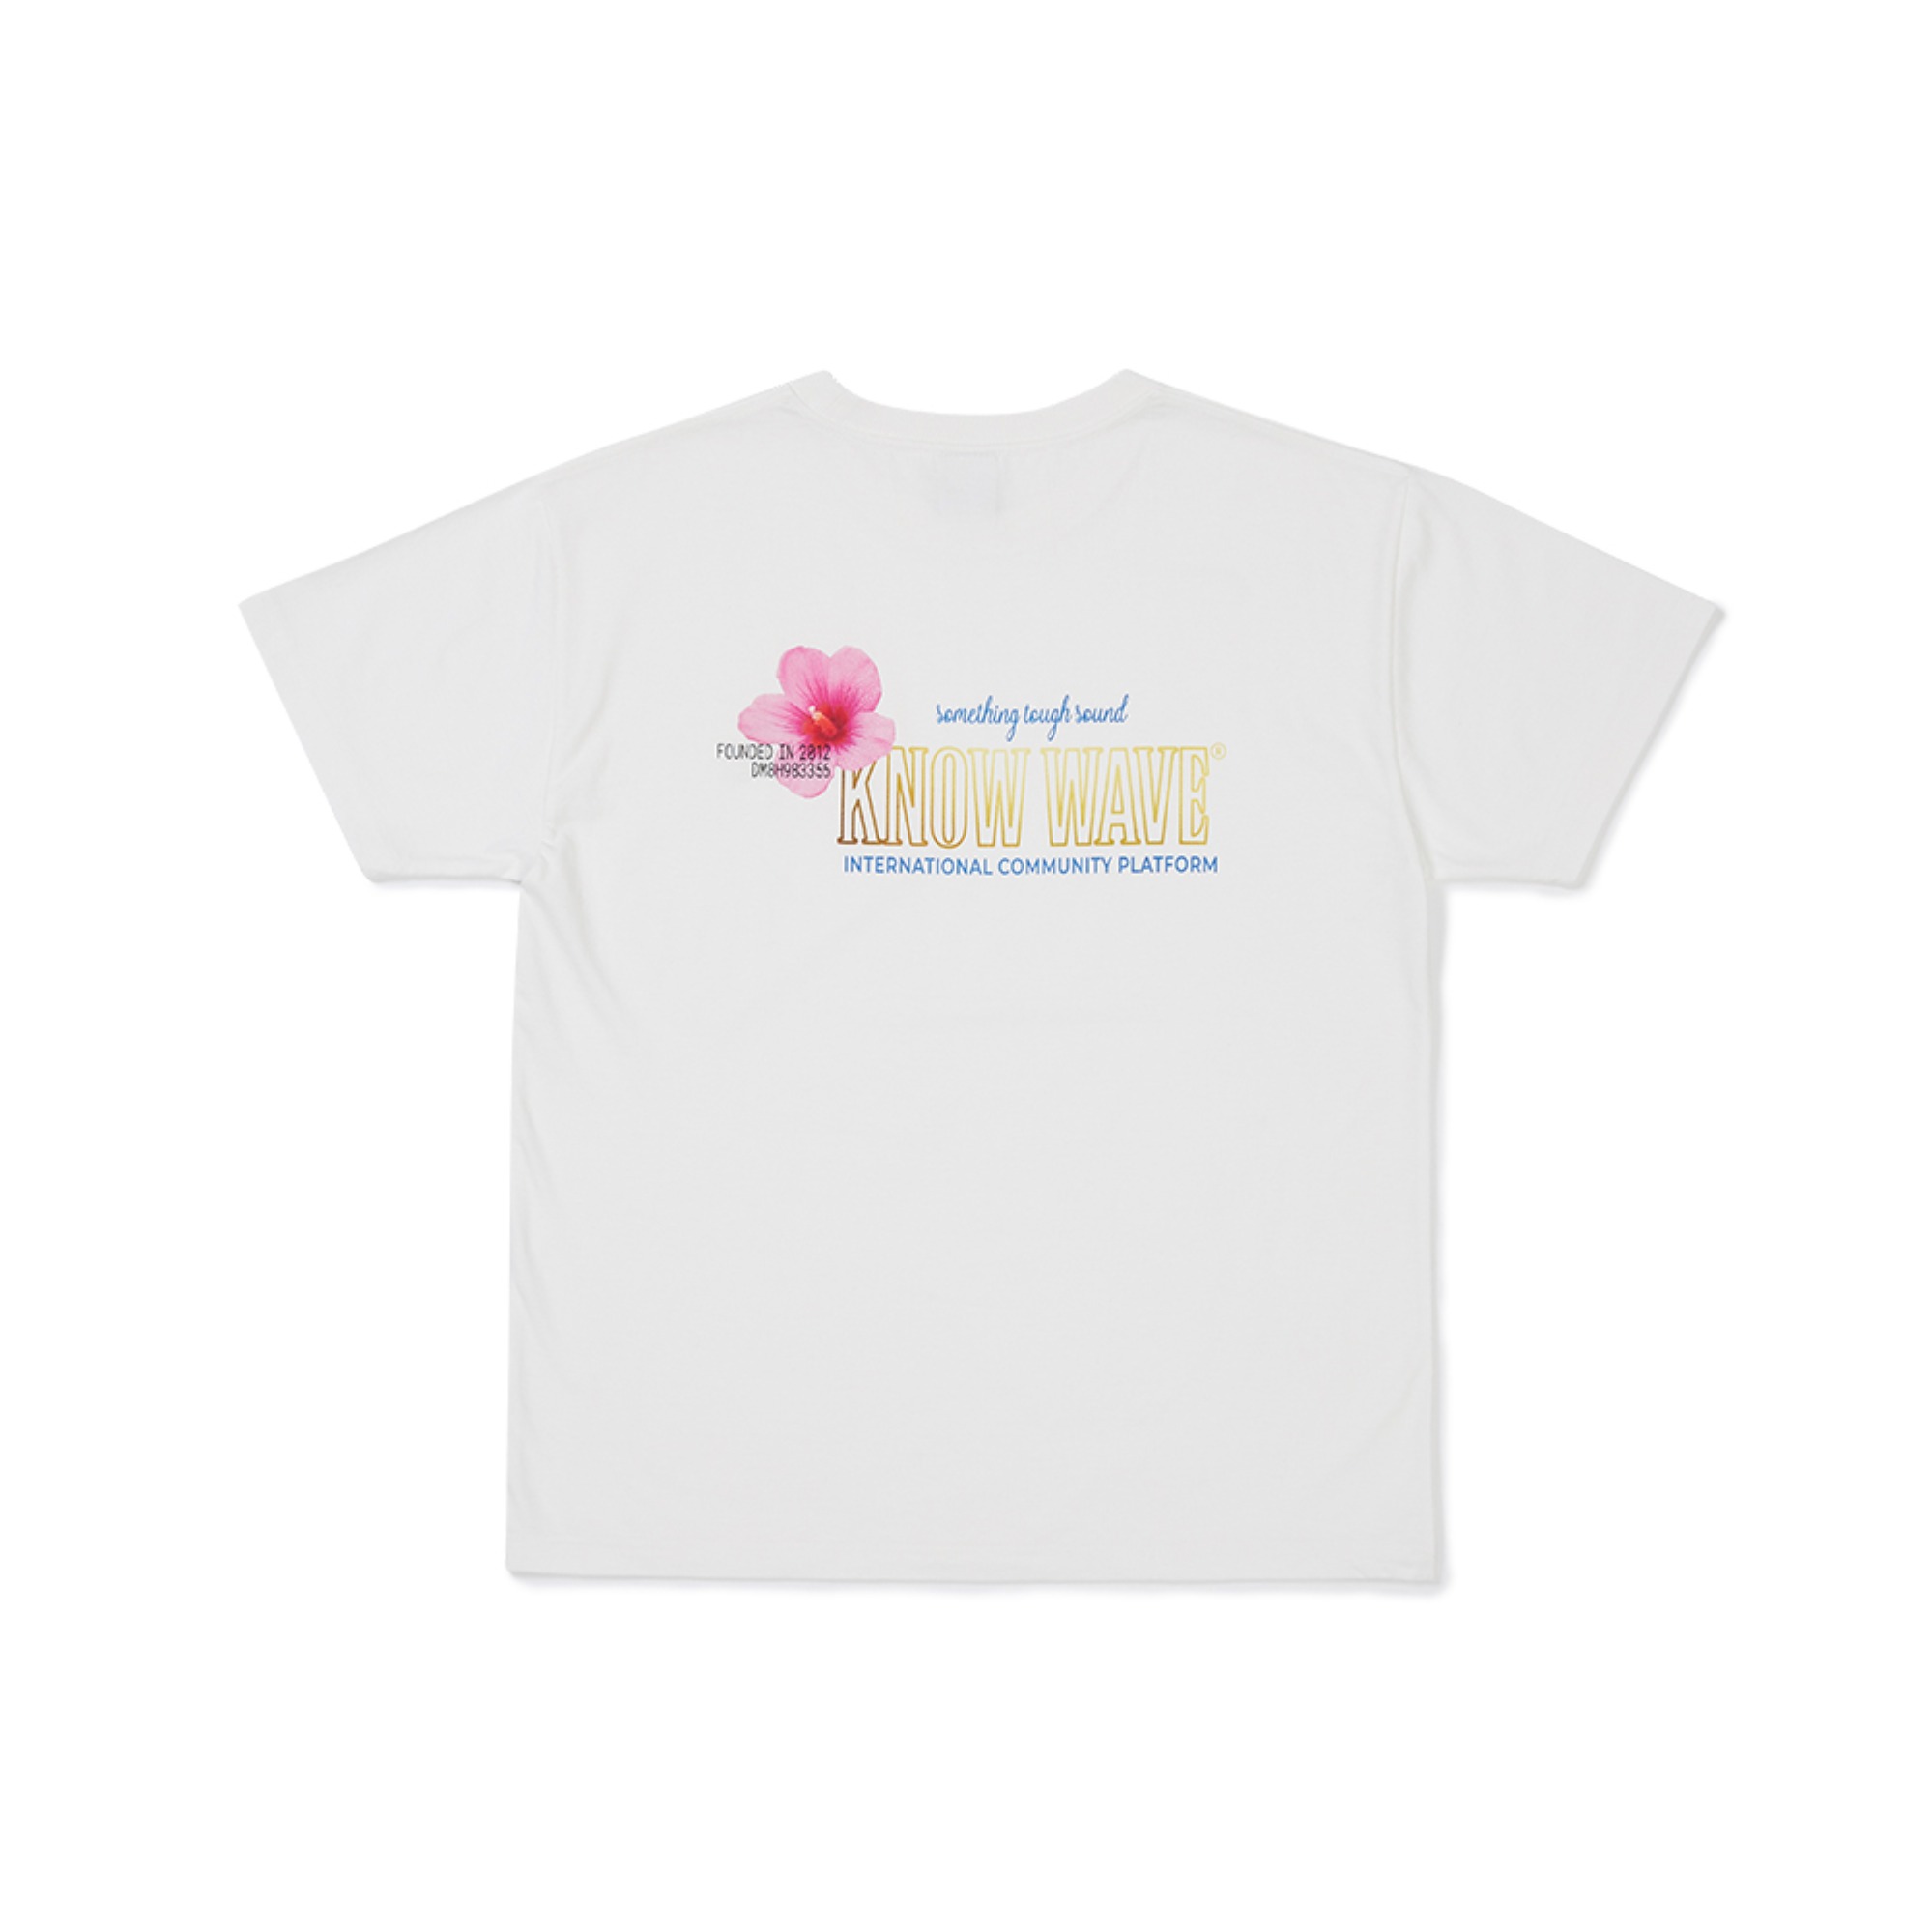 KNOW WAVE FLOWER T SHIRTS KNT015m(OFF WHITE)